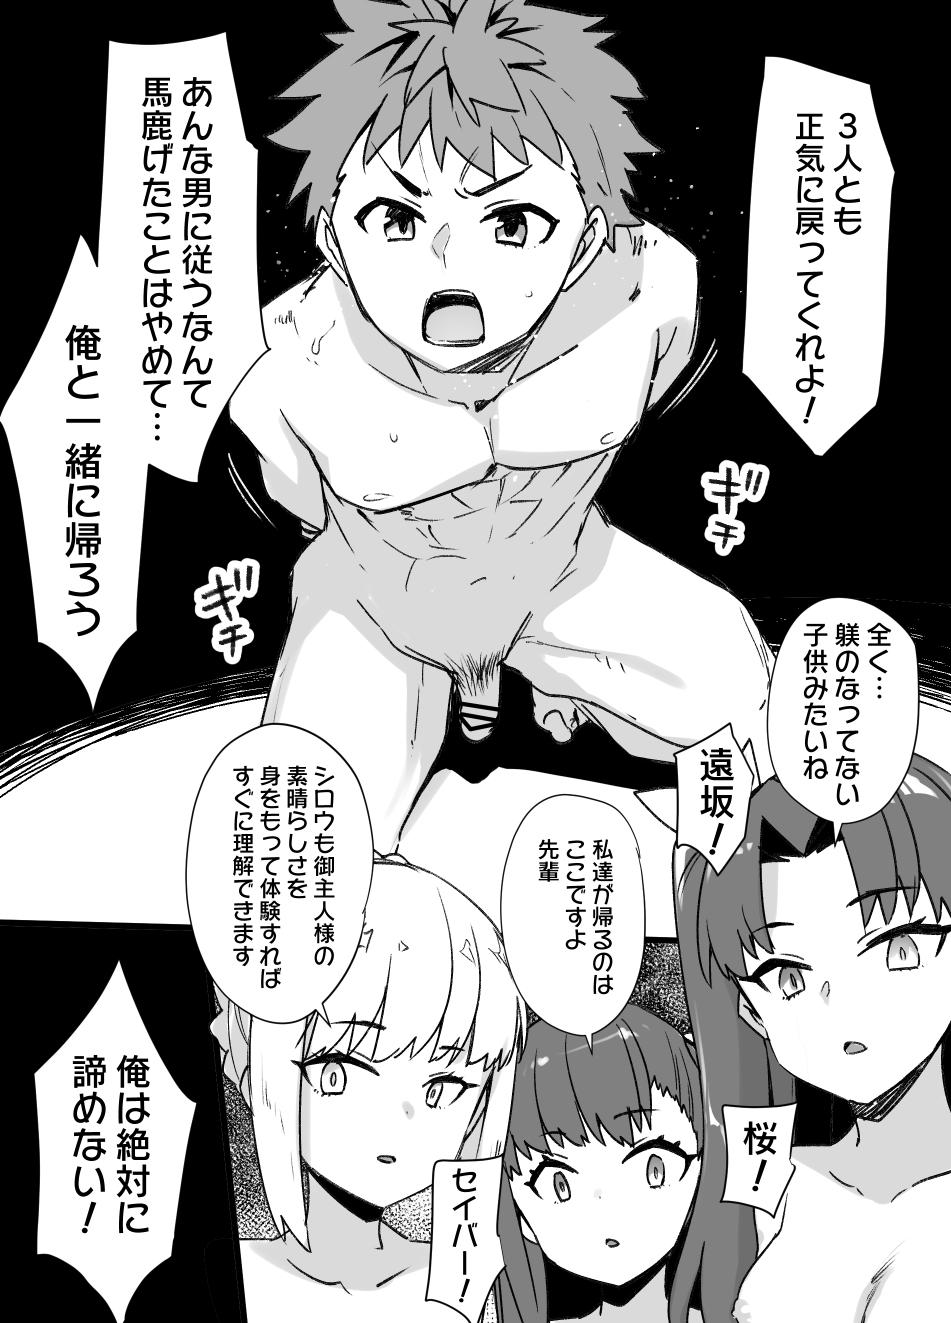 Motel A manga about Shirou Emiya who went to save Rin Tohsaka from captivity and is transformed into a female slave through physical feminization and brainwashing[Fate/ stay night) - Fate stay night Shecock - Page 7